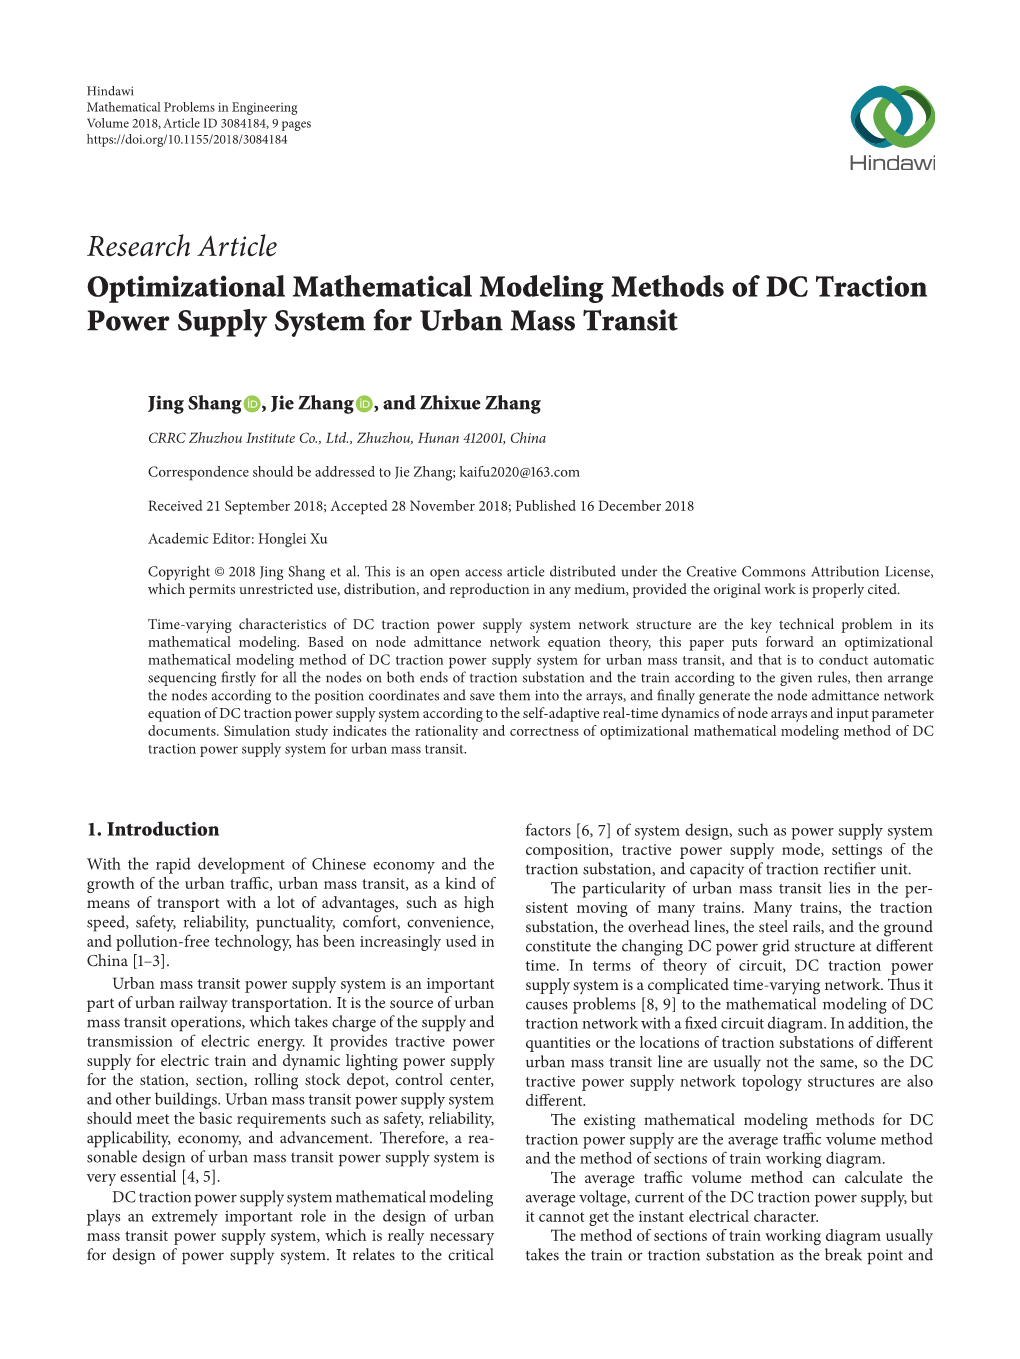 Research Article Optimizational Mathematical Modeling Methods of DC Traction Power Supply System for Urban Mass Transit